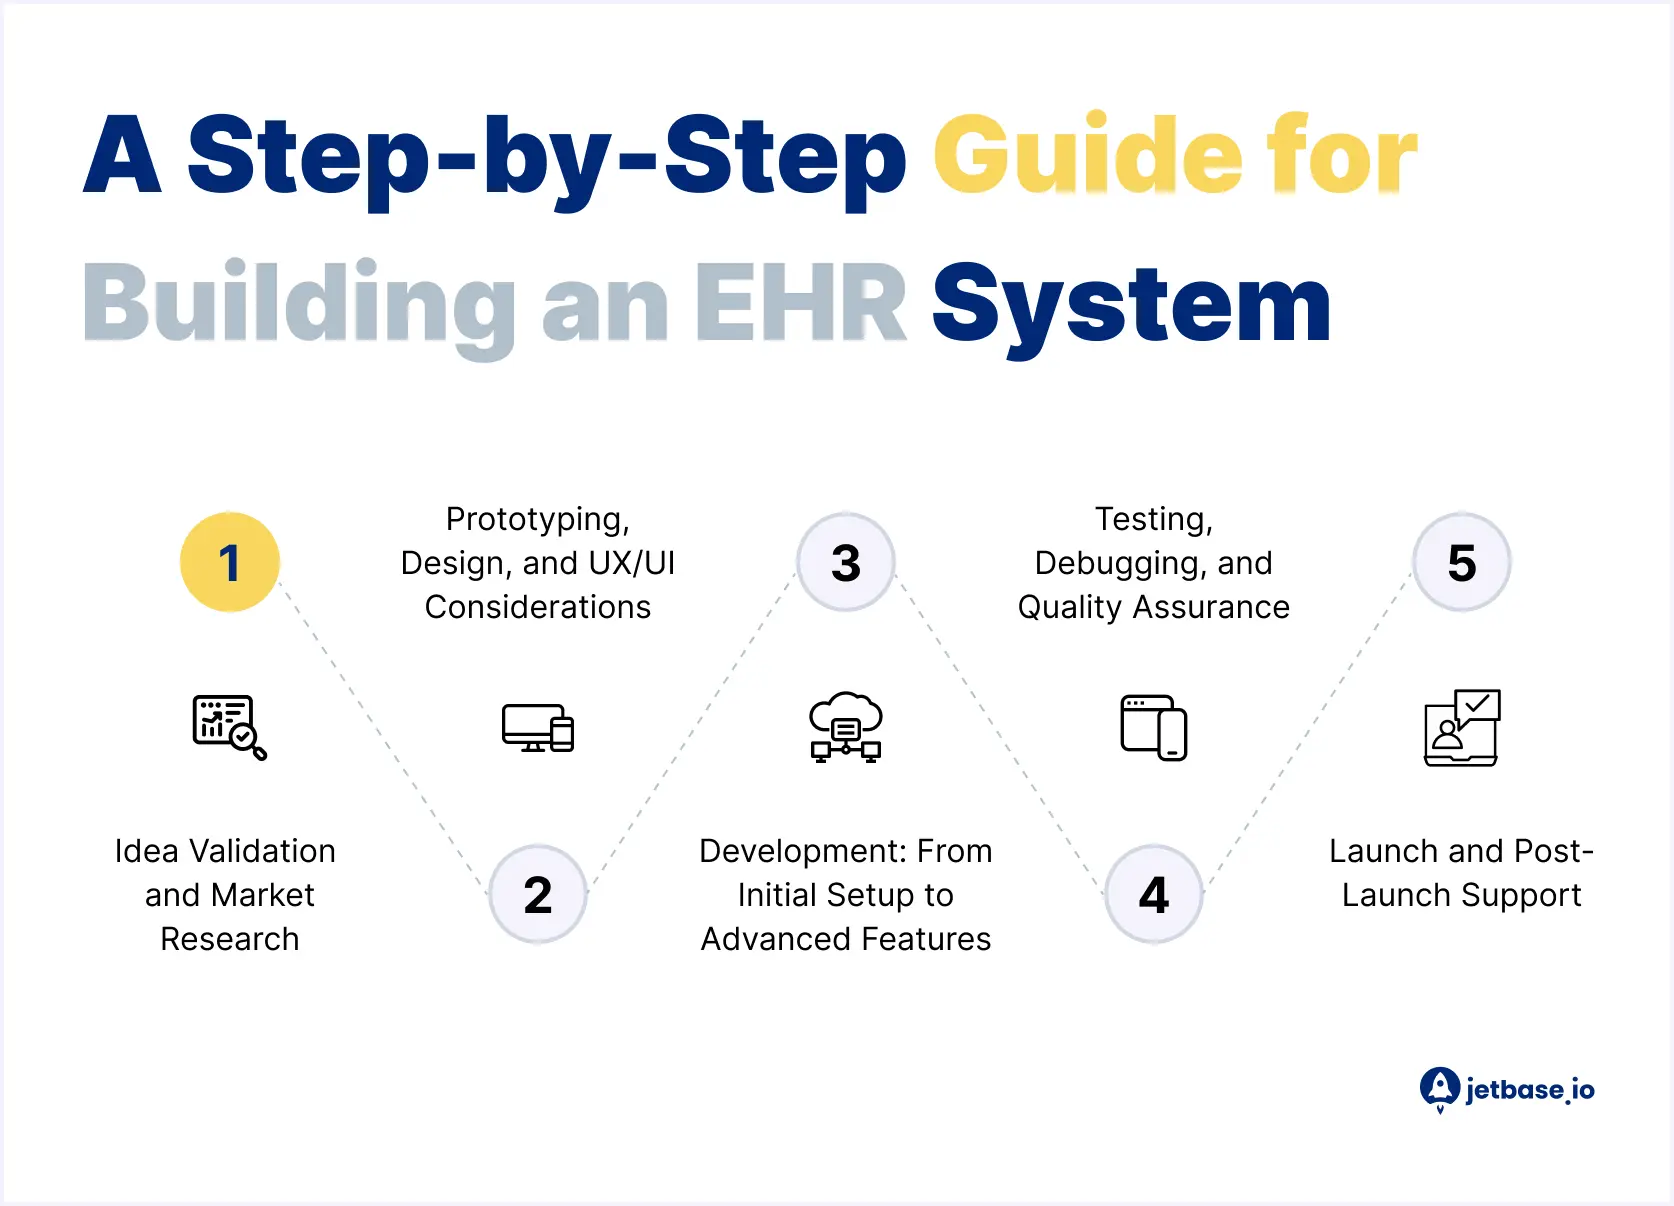 Building an EHR System A Step-by-Step Guide.webp